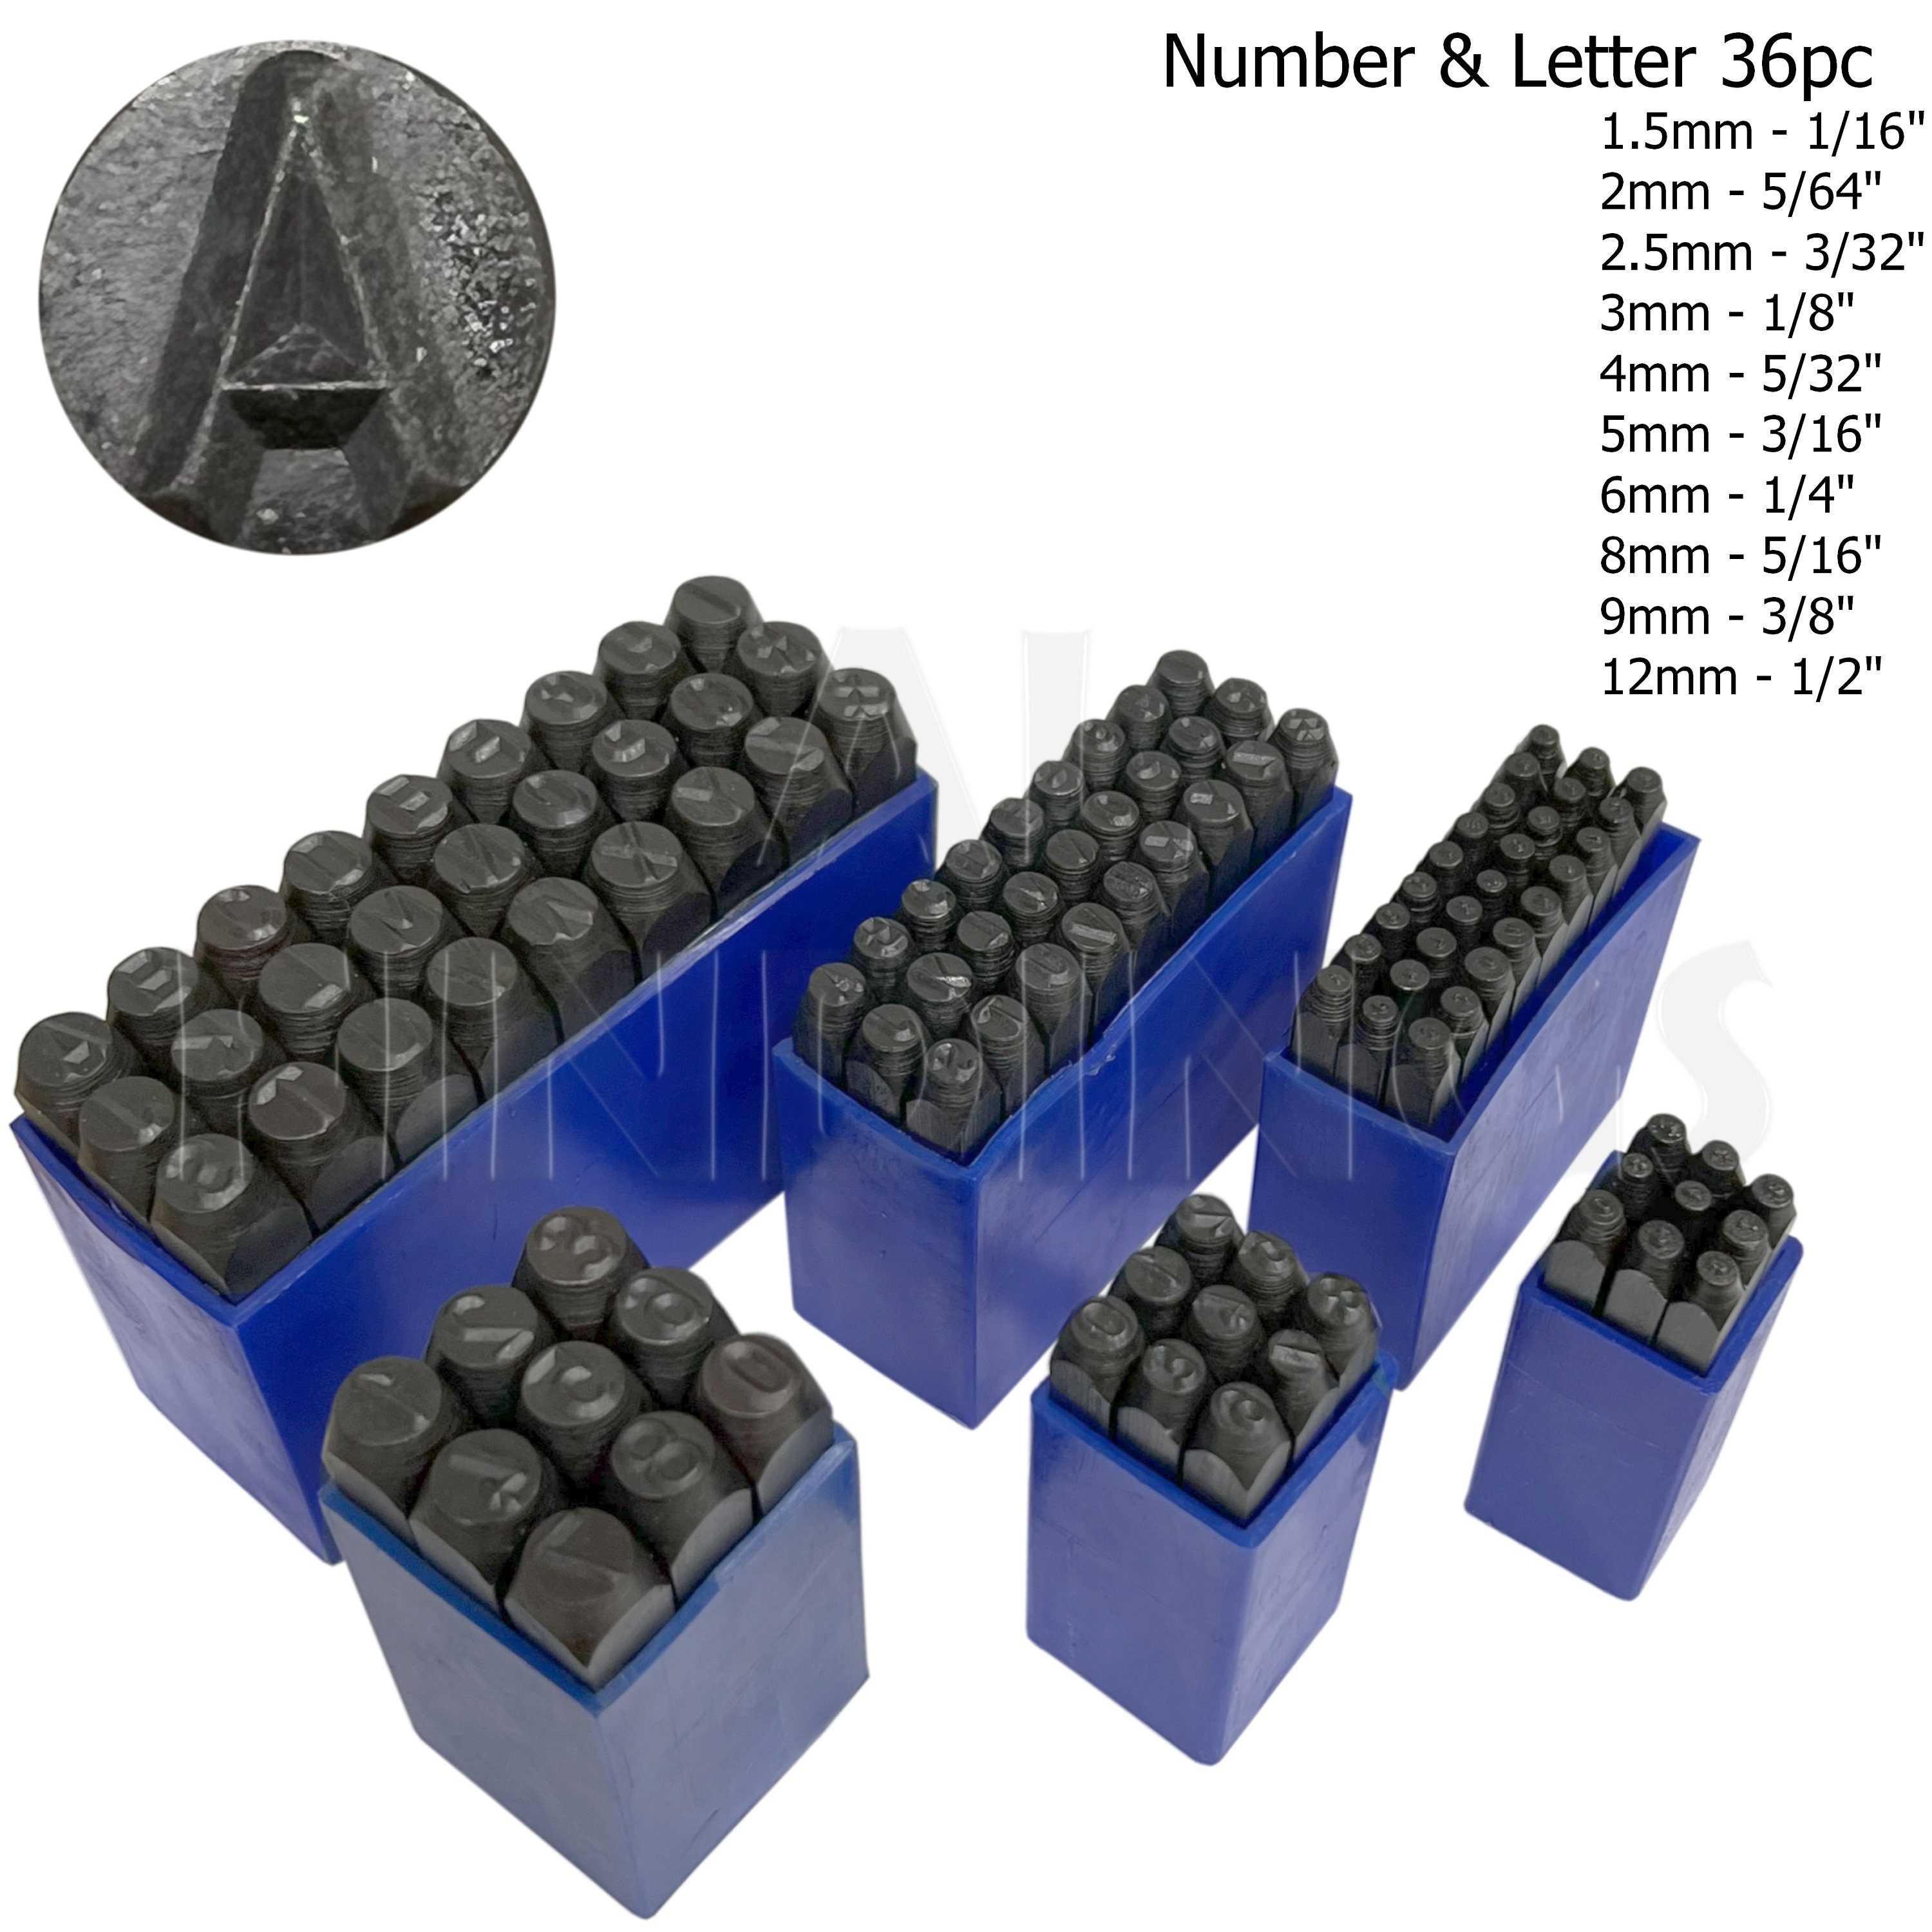 36 Piece Set 4mm Shank Letter and Number Marking Punches Letters A-Z Number  Numerals 0-9 PLUS Carry Case Punch Set Craft Marking Punch Tool -  Hong  Kong